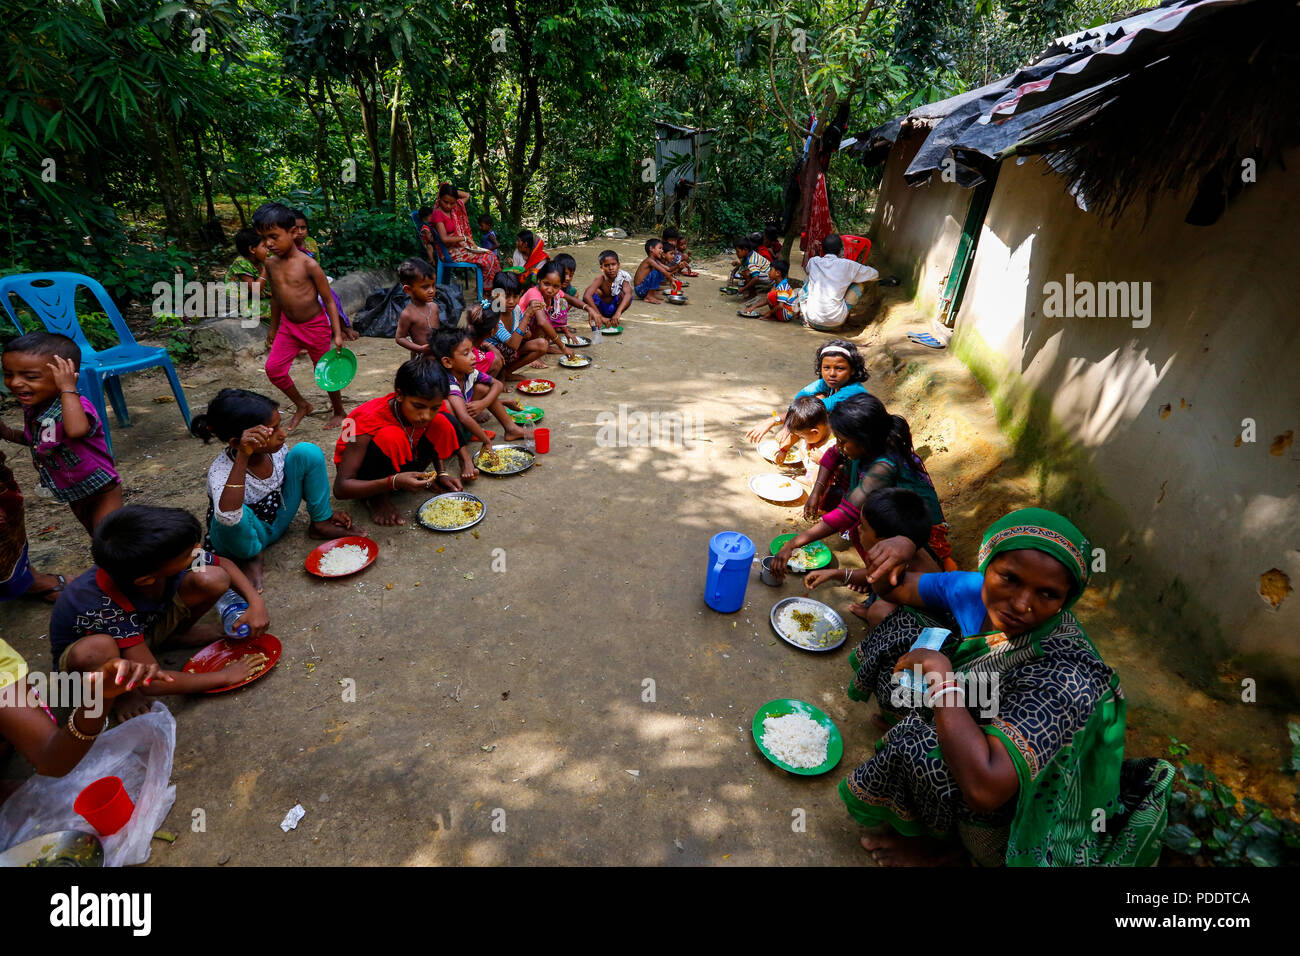 Hindu refugees are given meals at a temporary shelter near Kutupalong in Cox's Bazar. Hundreds of Hindus fled Myanmar's Rakhine to seek shelter in Cox Stock Photo